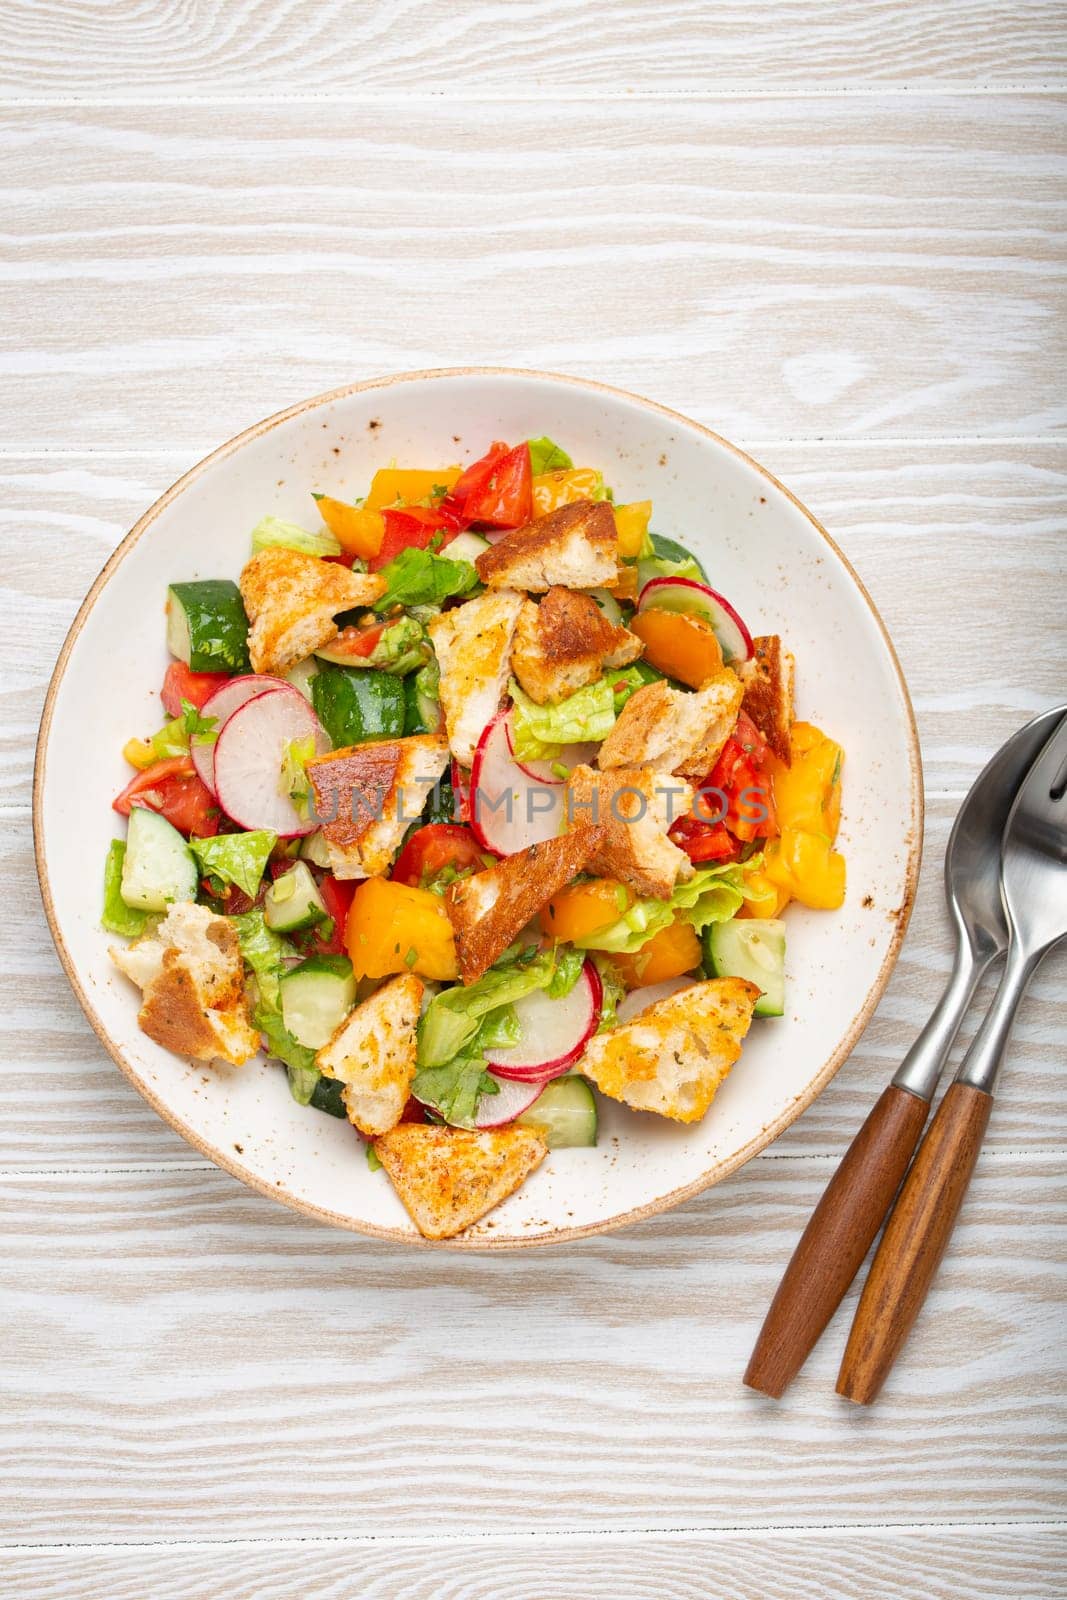 Traditional Levant dish Fattoush salad, Arab cuisine, with pita bread croutons, vegetables, herbs. Healthy Middle Eastern vegetarian salad, rustic wooden white background top view by its_al_dente